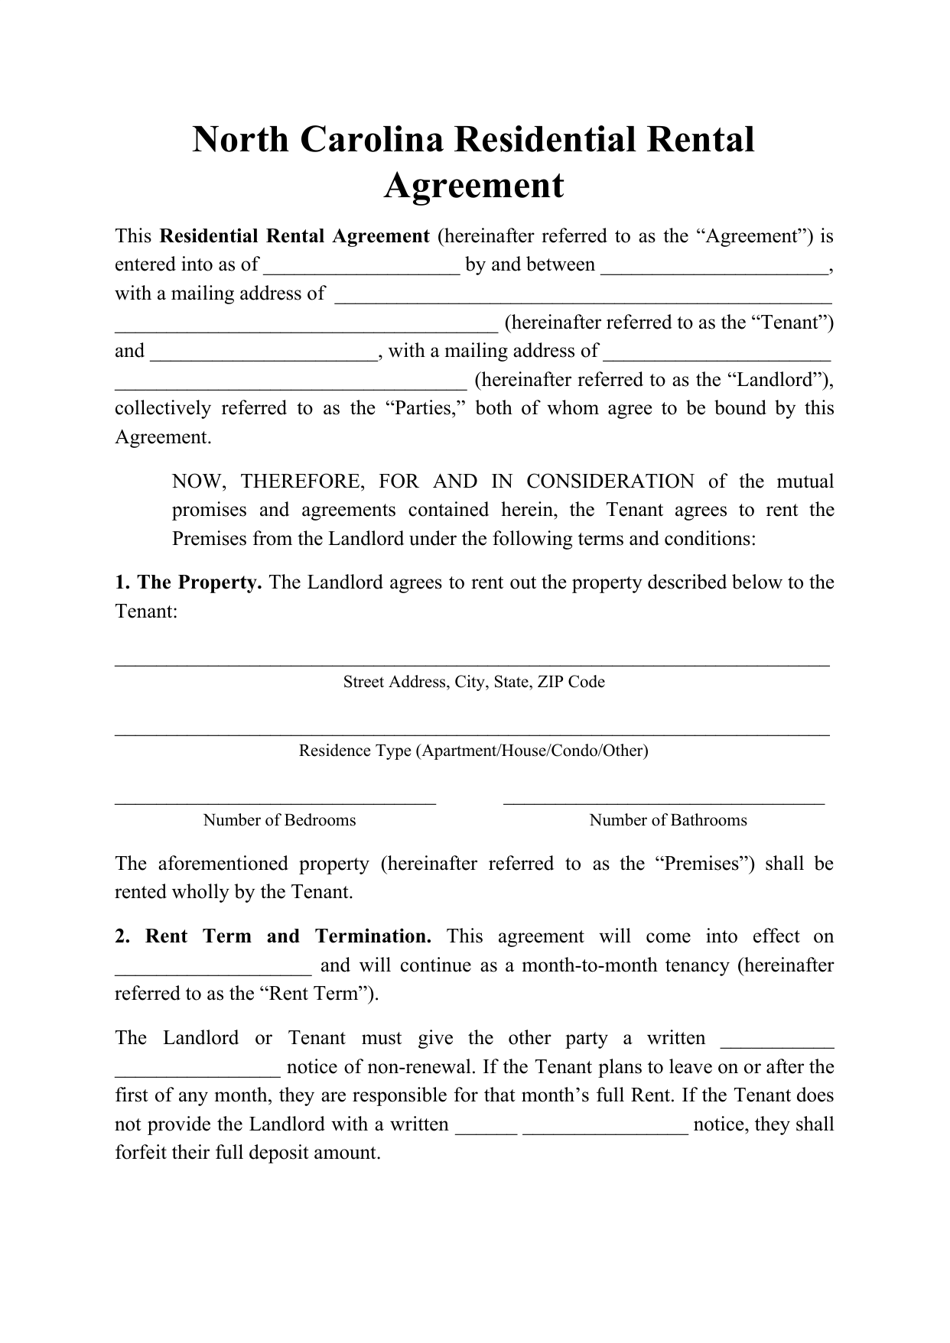 Residential Rental Agreement Template - North Carolina, Page 1